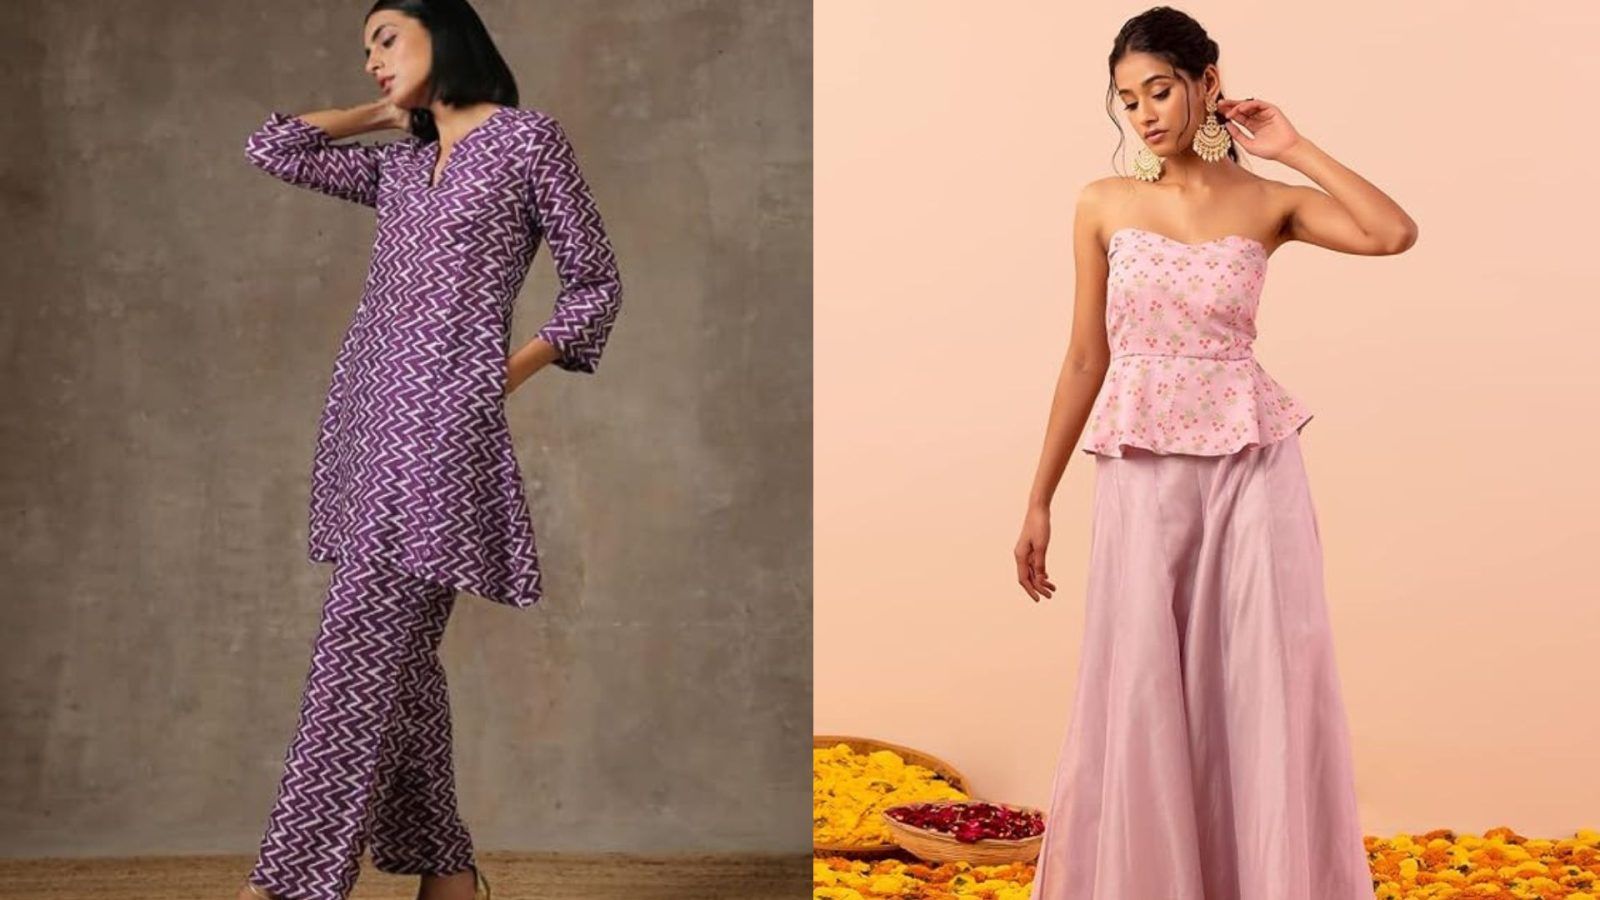 These Ethnic Co-ord Sets Can Up Your Fashion Game at Weddings